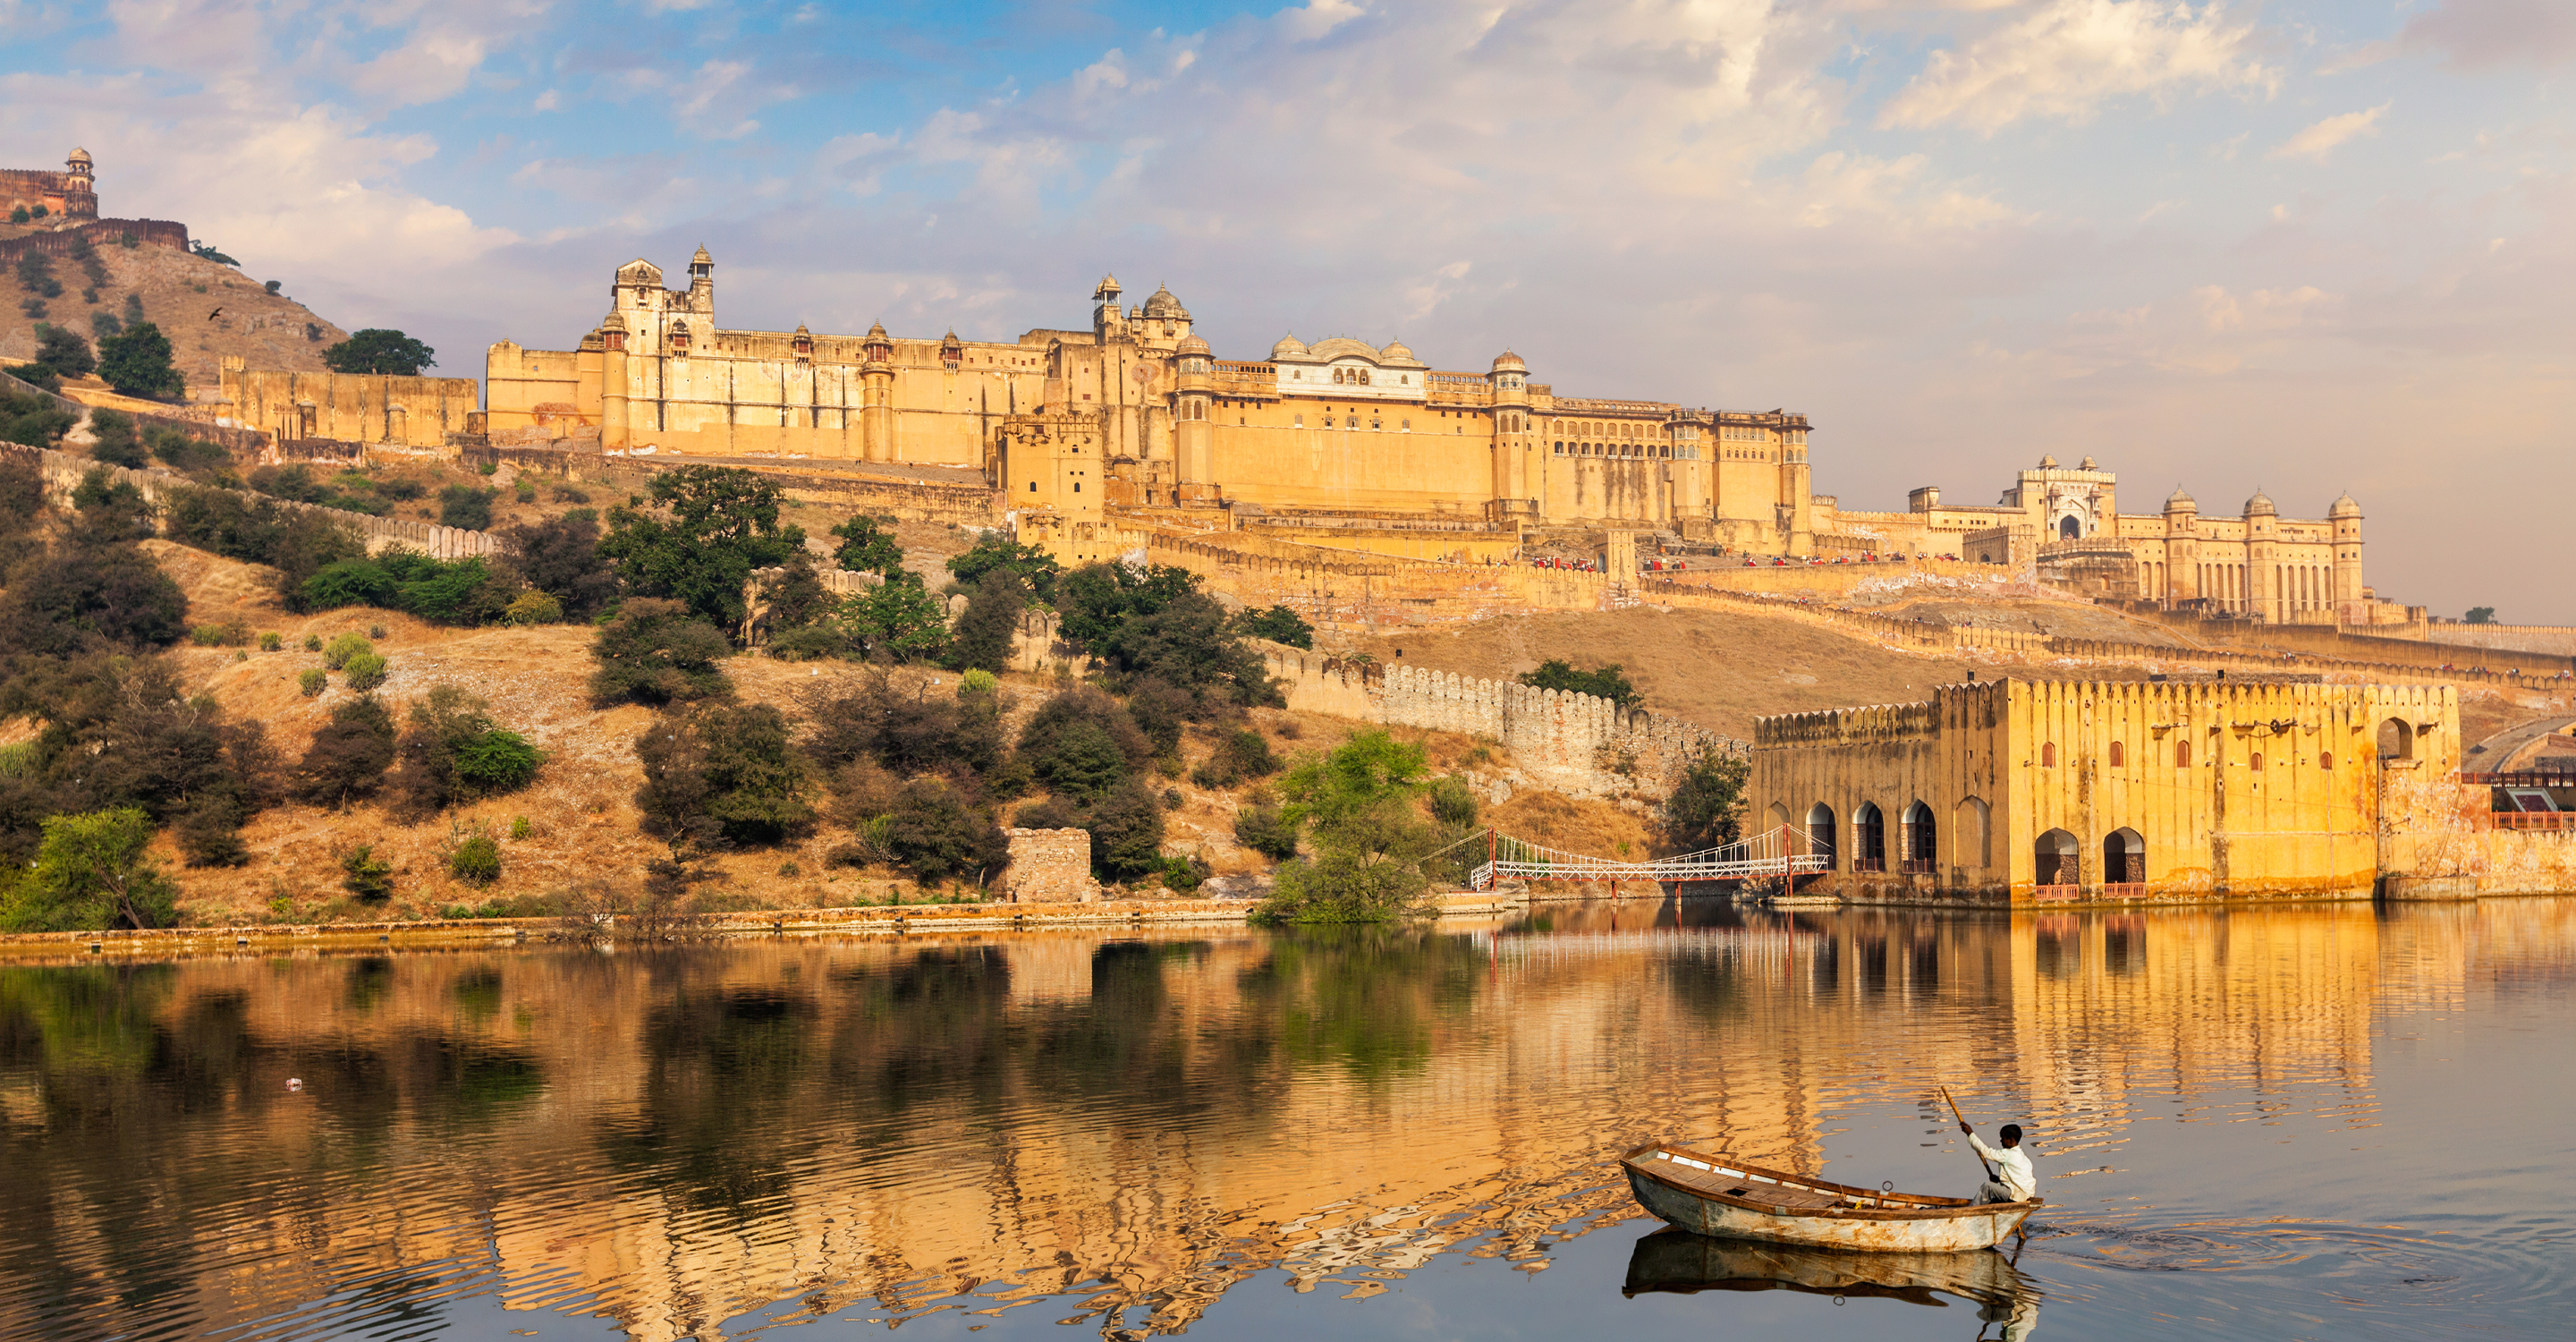 A man paddles a boat in front of the Amer sandstone fort in Jaipur, India